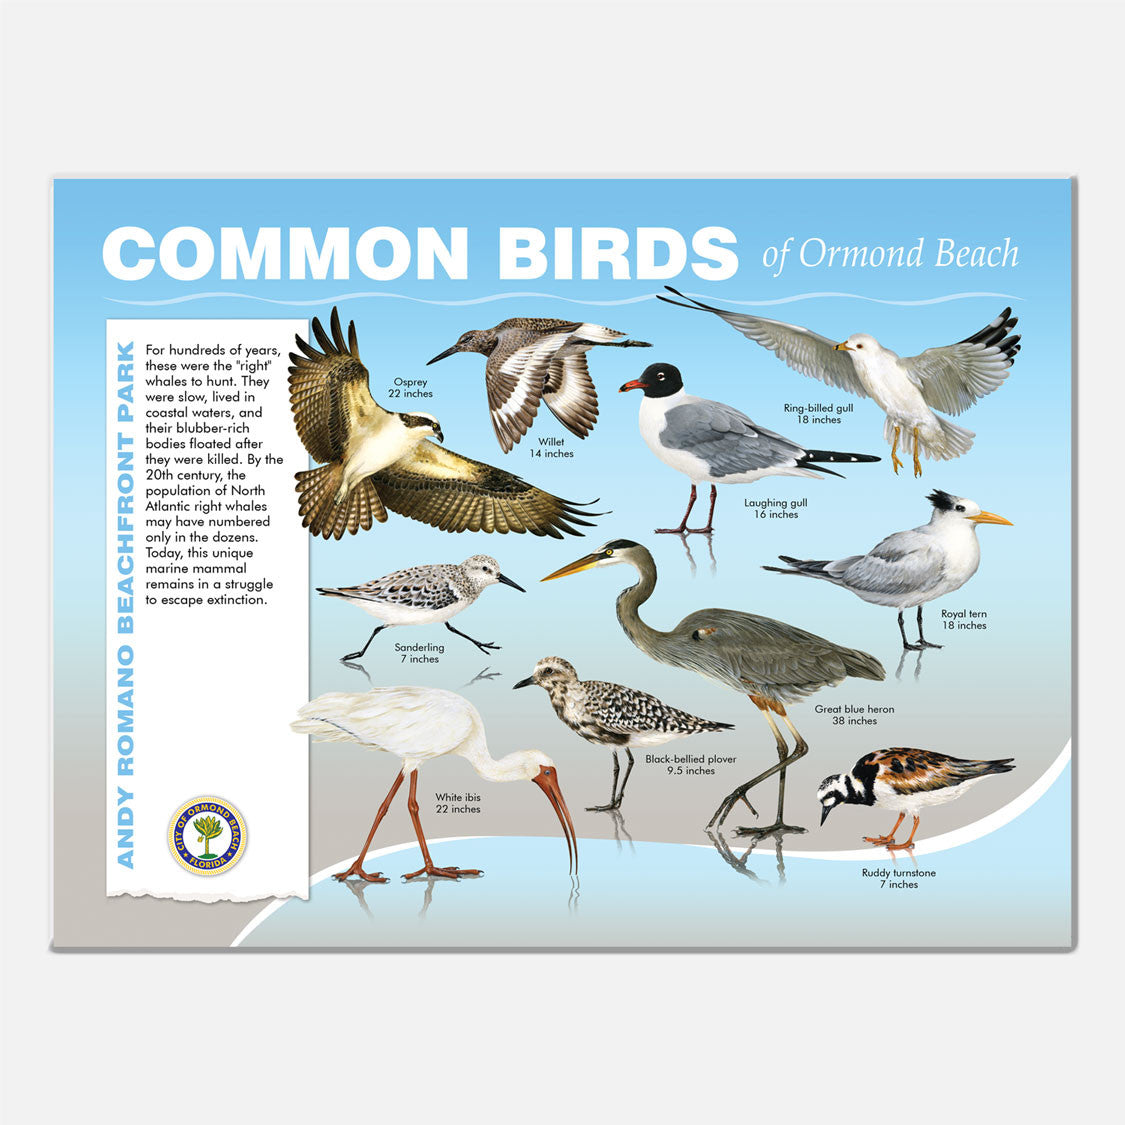 This beautifully illustrated educational display describes and identifies beach birds of Andy Romano Beachfront Park, Ormond Beach, Florida.